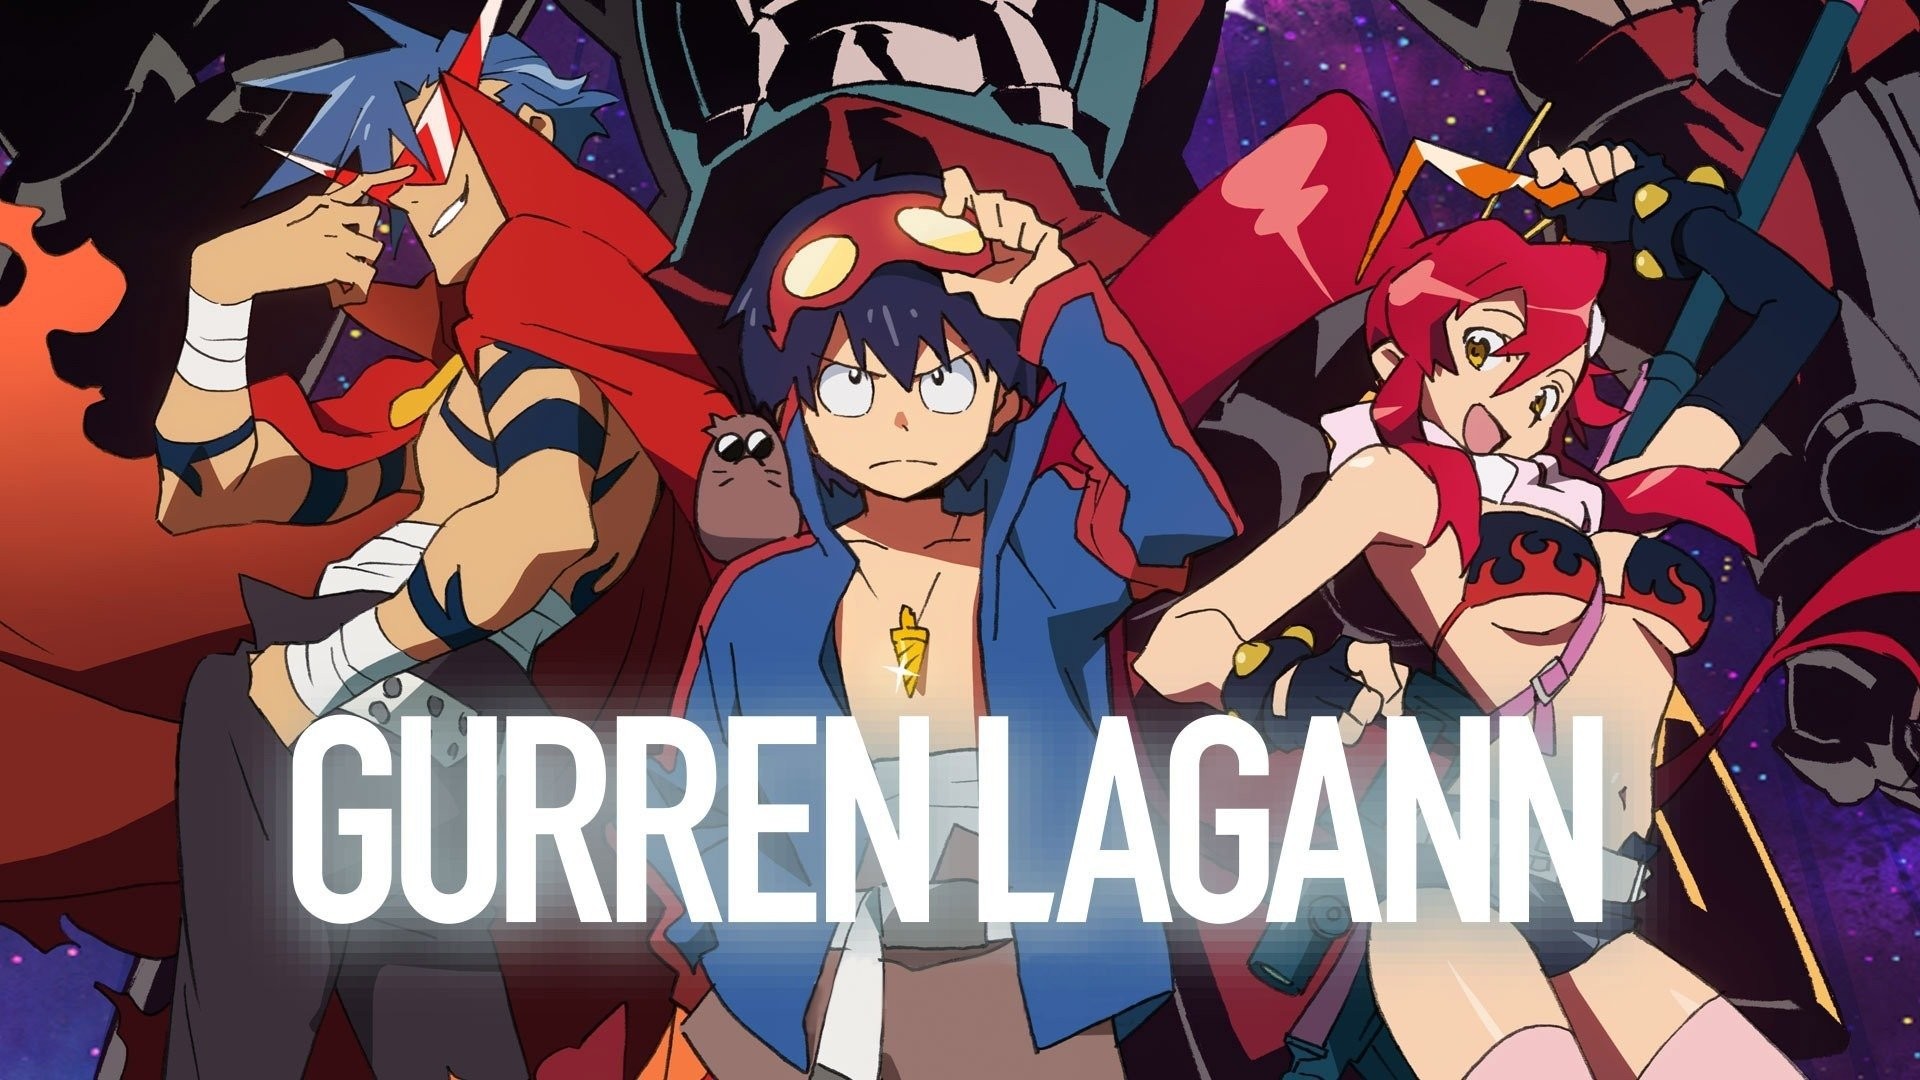 Gurren Lagann. I think that's all I need to say. - #70810152 added by  lawuser at Anime & Manga - dubbed anime shows, anime games, anime art, mango